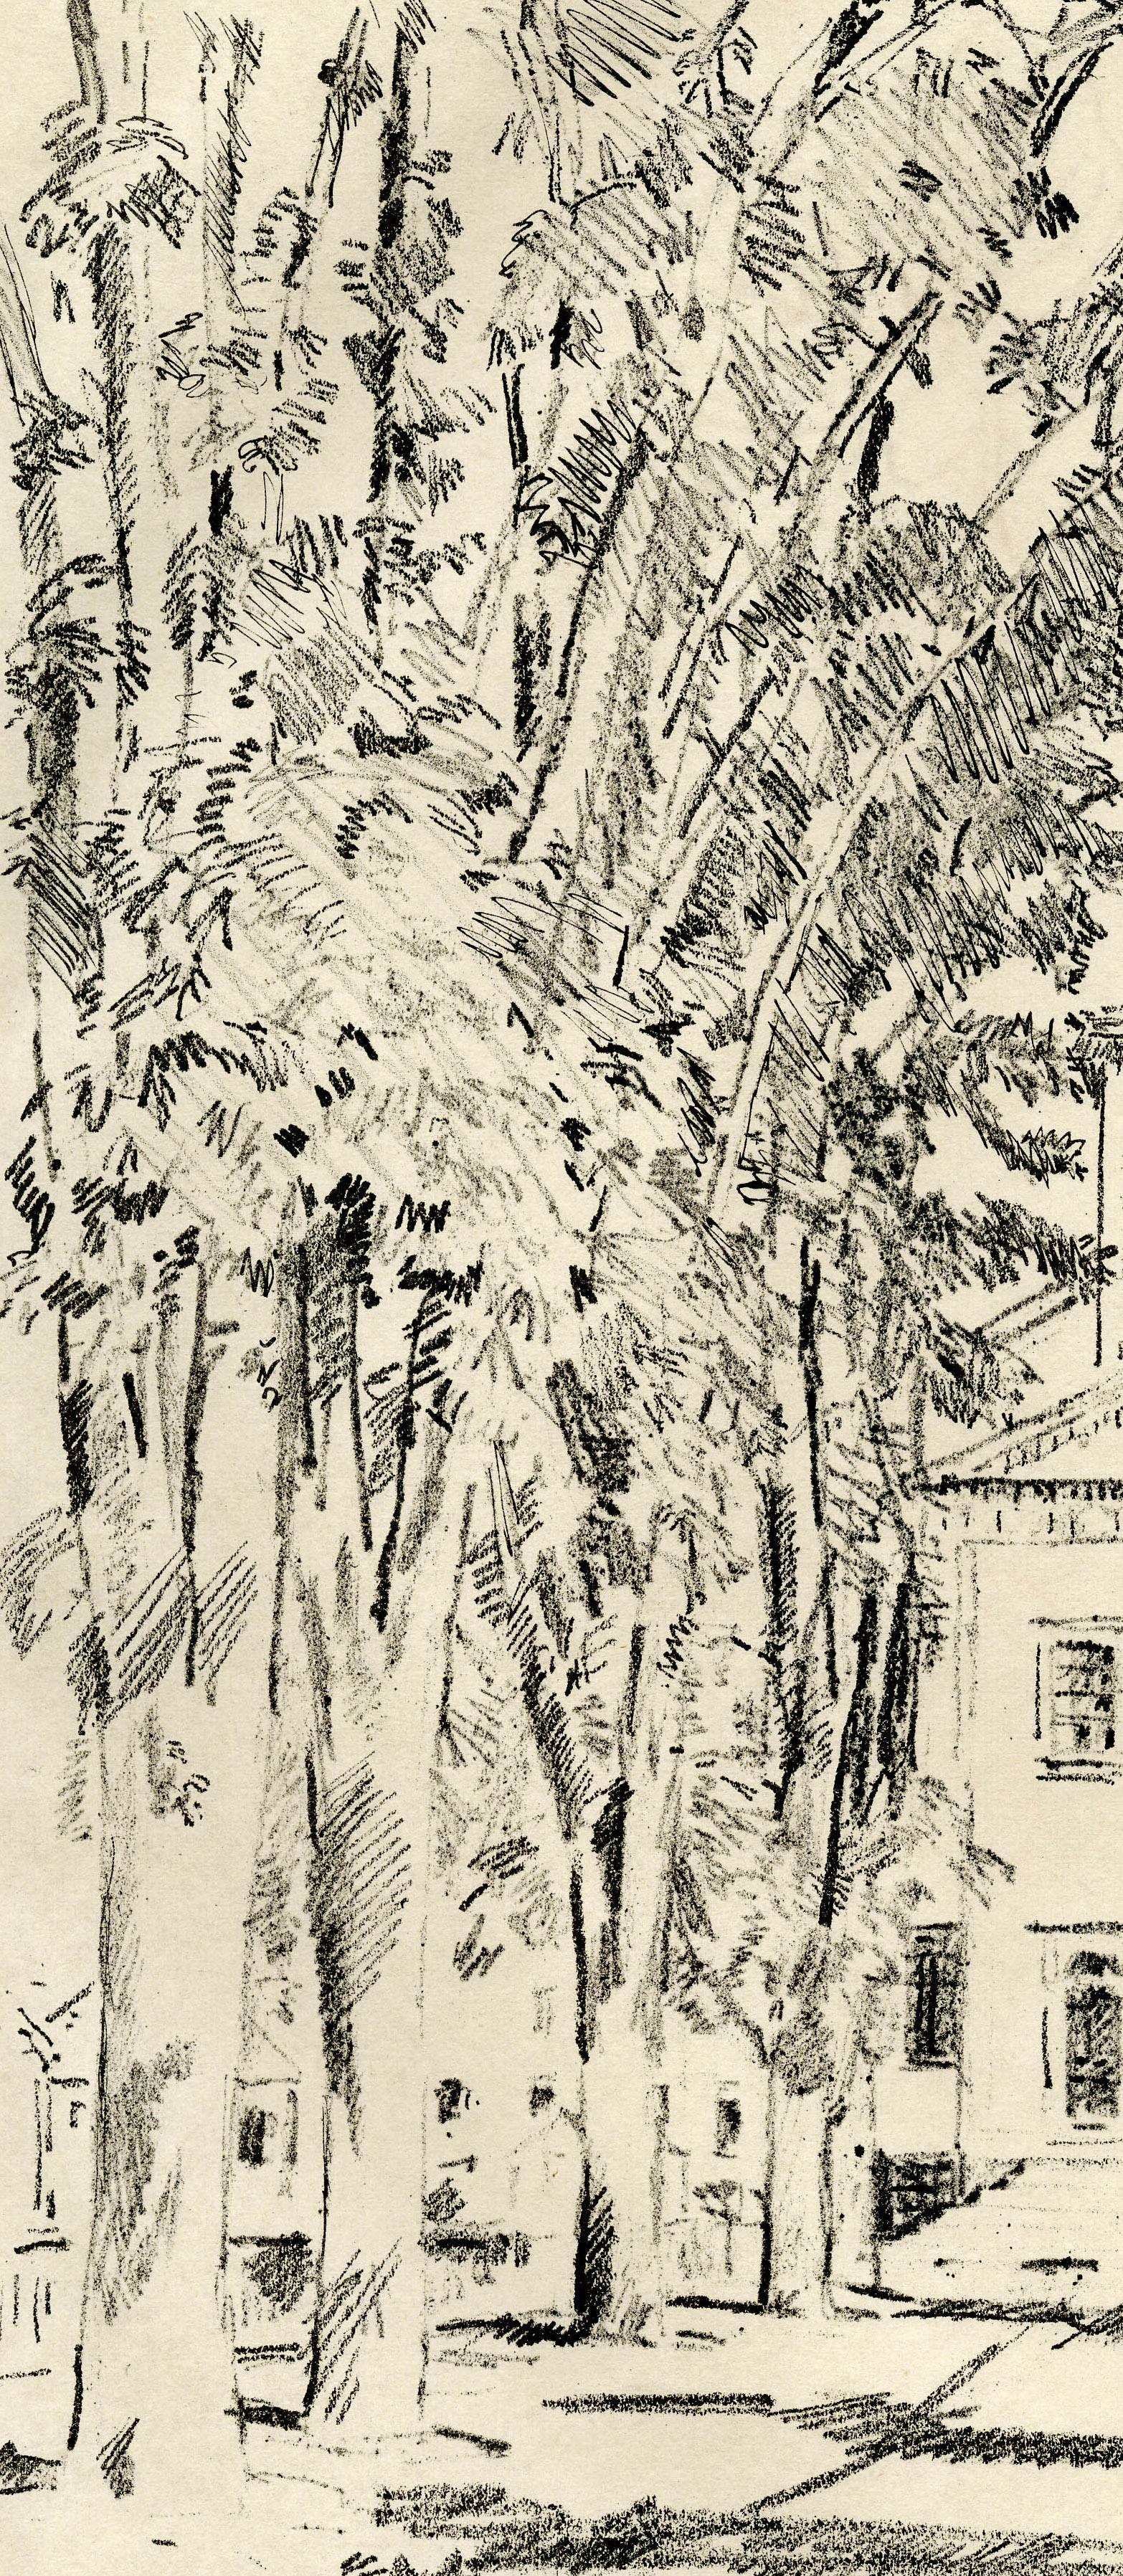 Signed, titled, and dated in the stone lower right. 
Artist's cipher lower right (see photo)
Edition: 101
An impression of this lithograph is in the National Gallery of Art, Washington and the Metropolitan Museum of Art, New York
Hassam also created